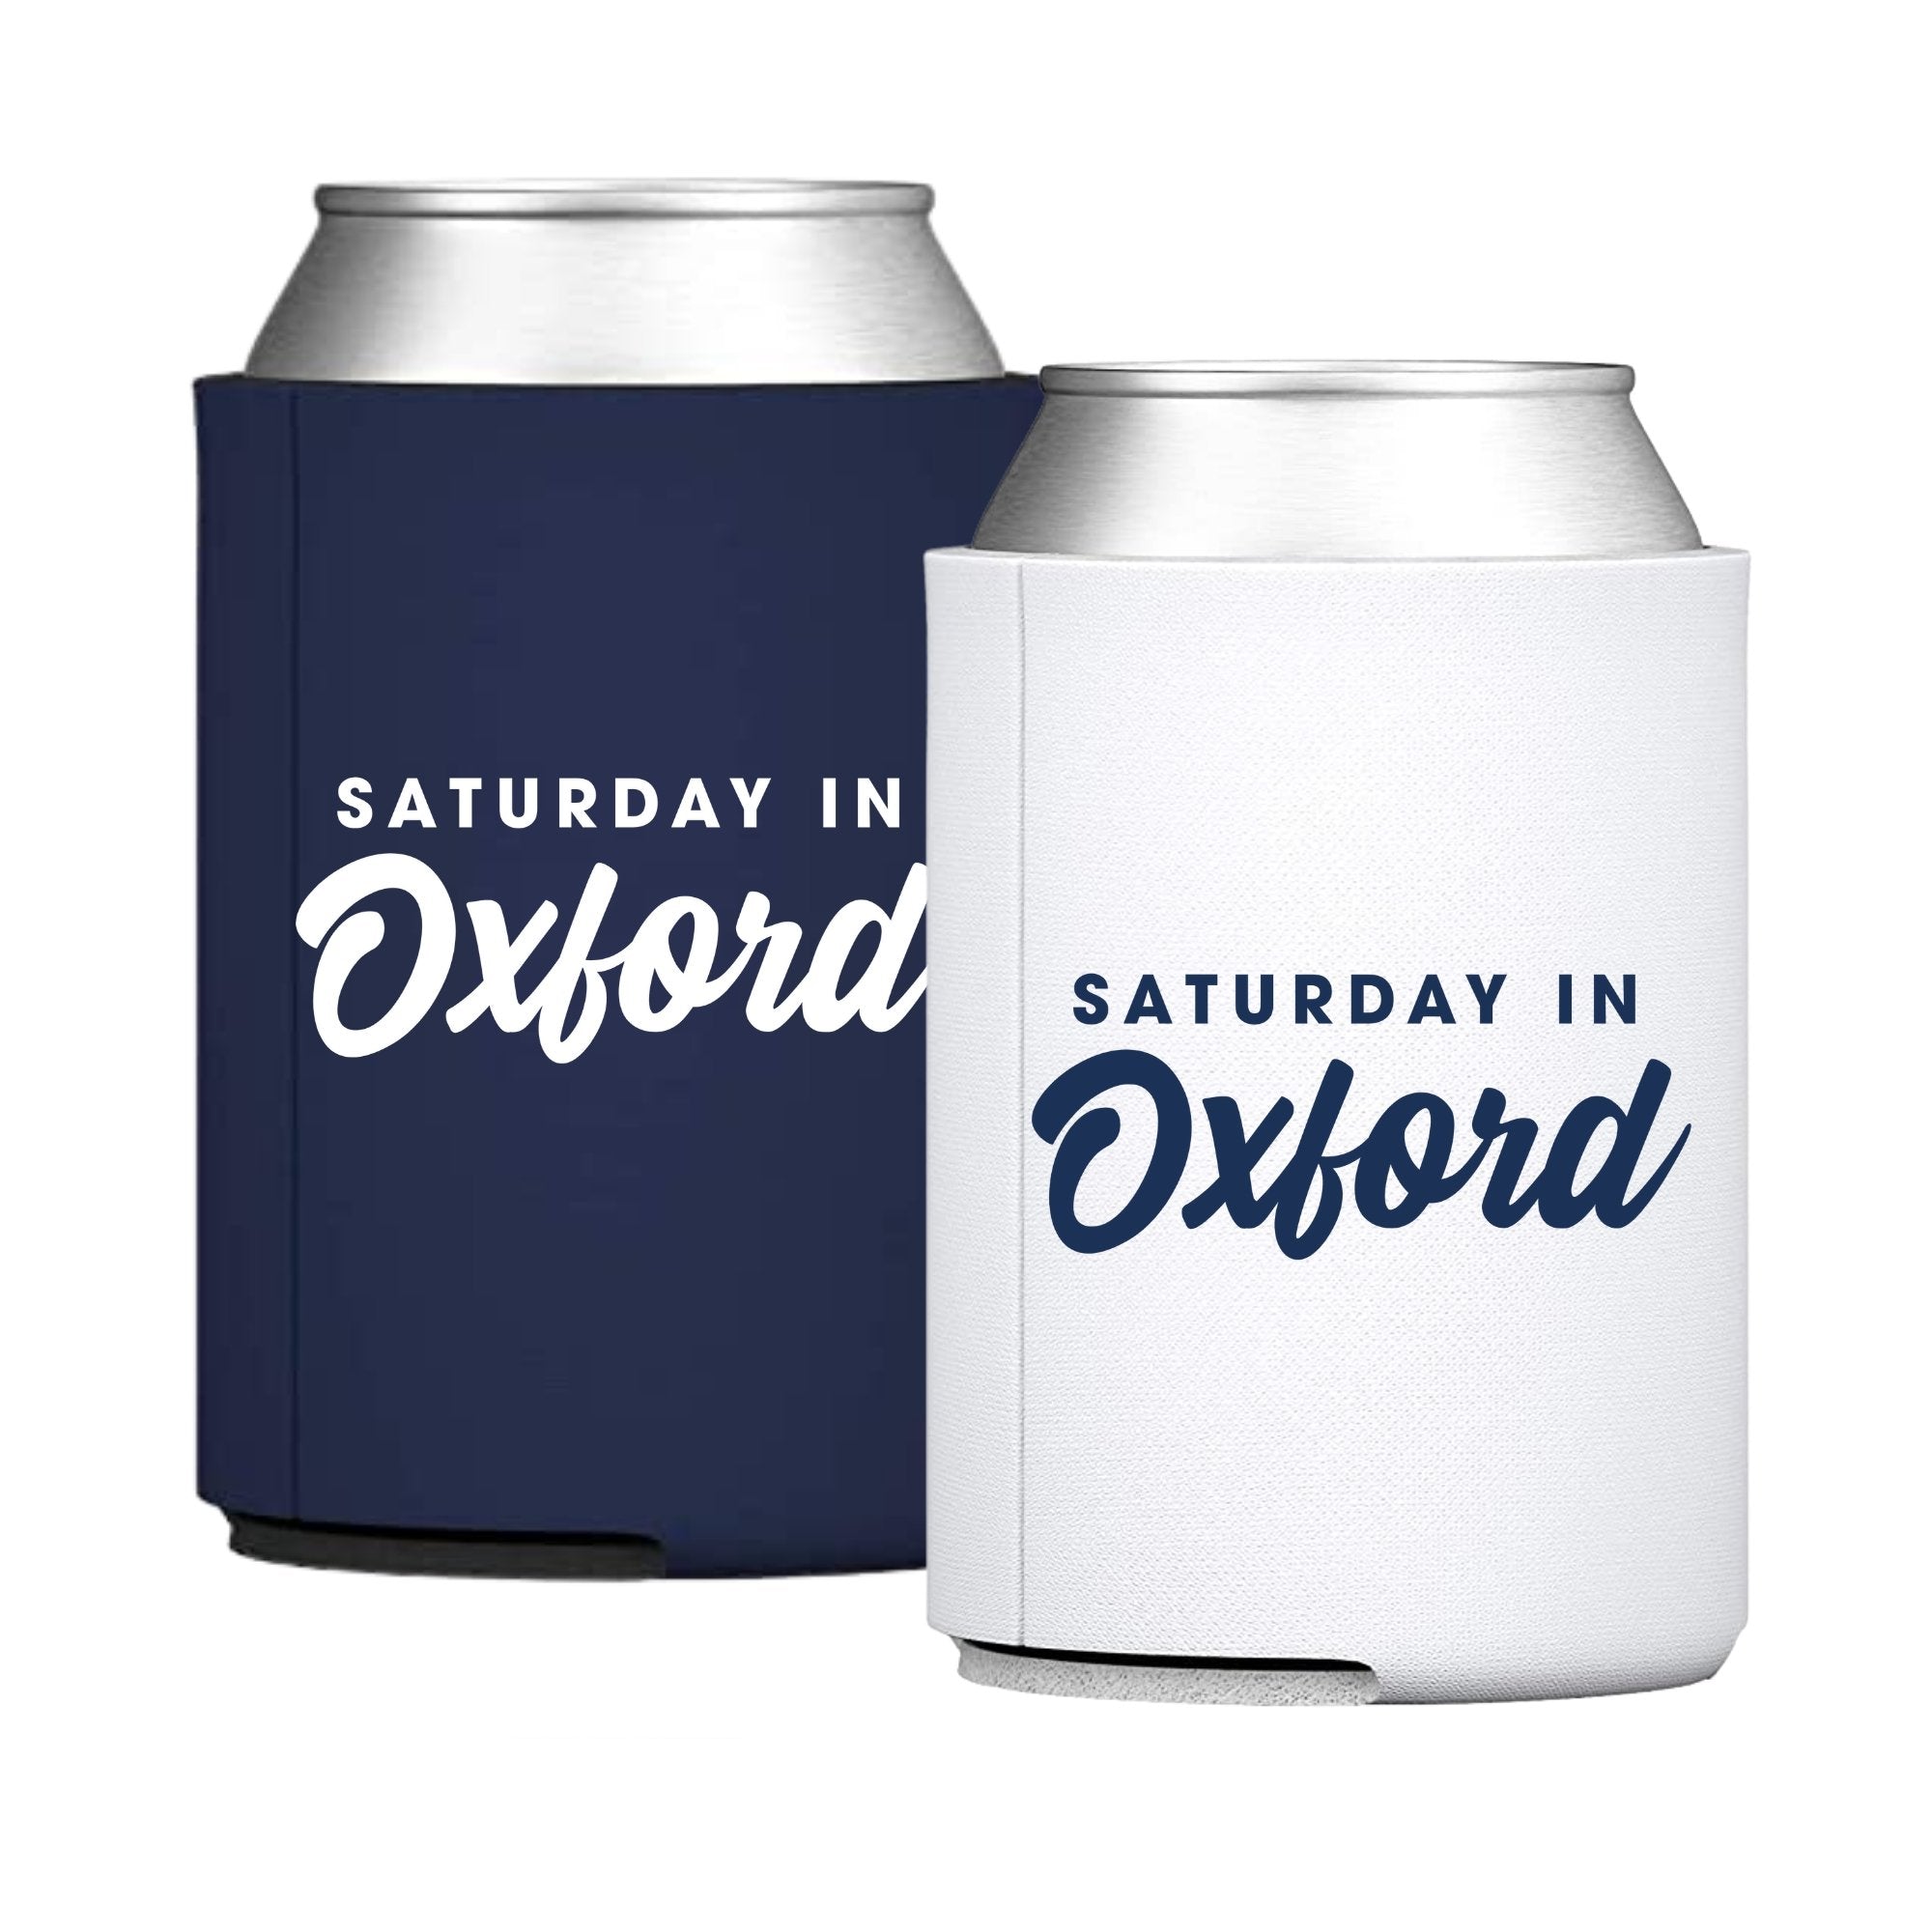 Two can coolers read "Saturday in Oxford"